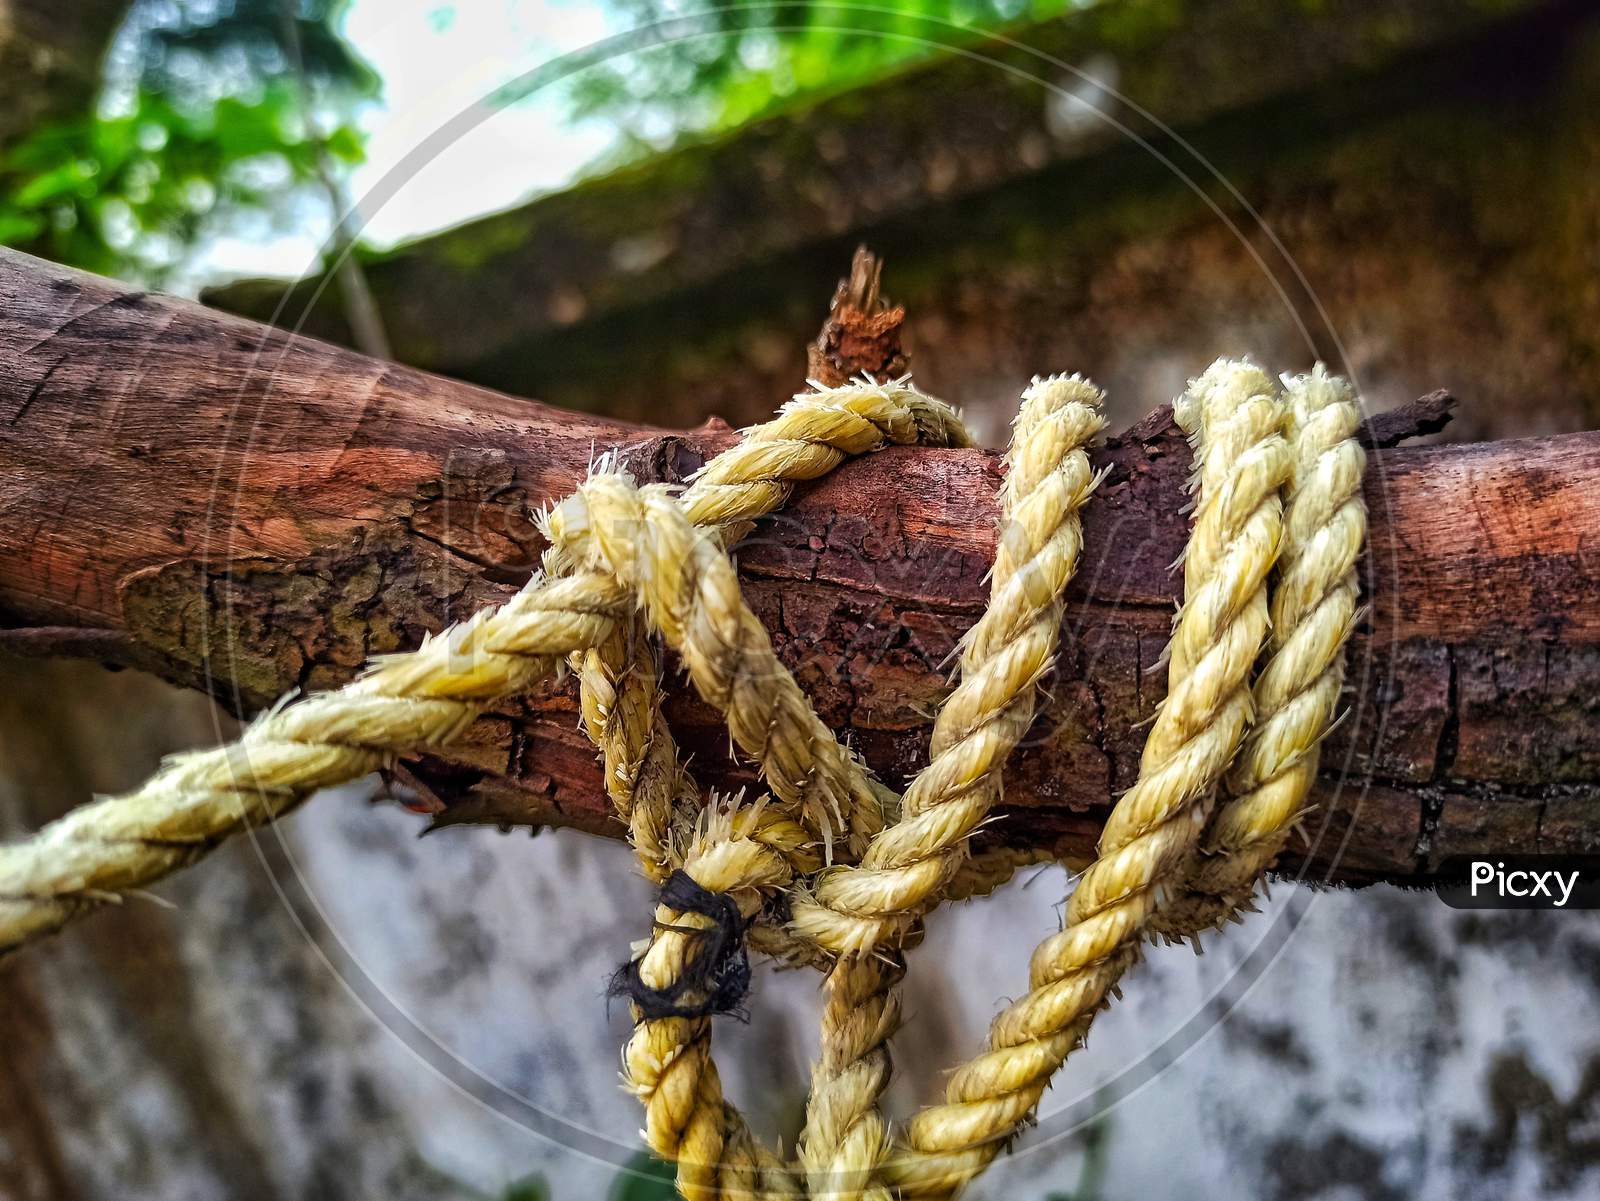 An old yellow rope tied in an old dry branch of a tree.